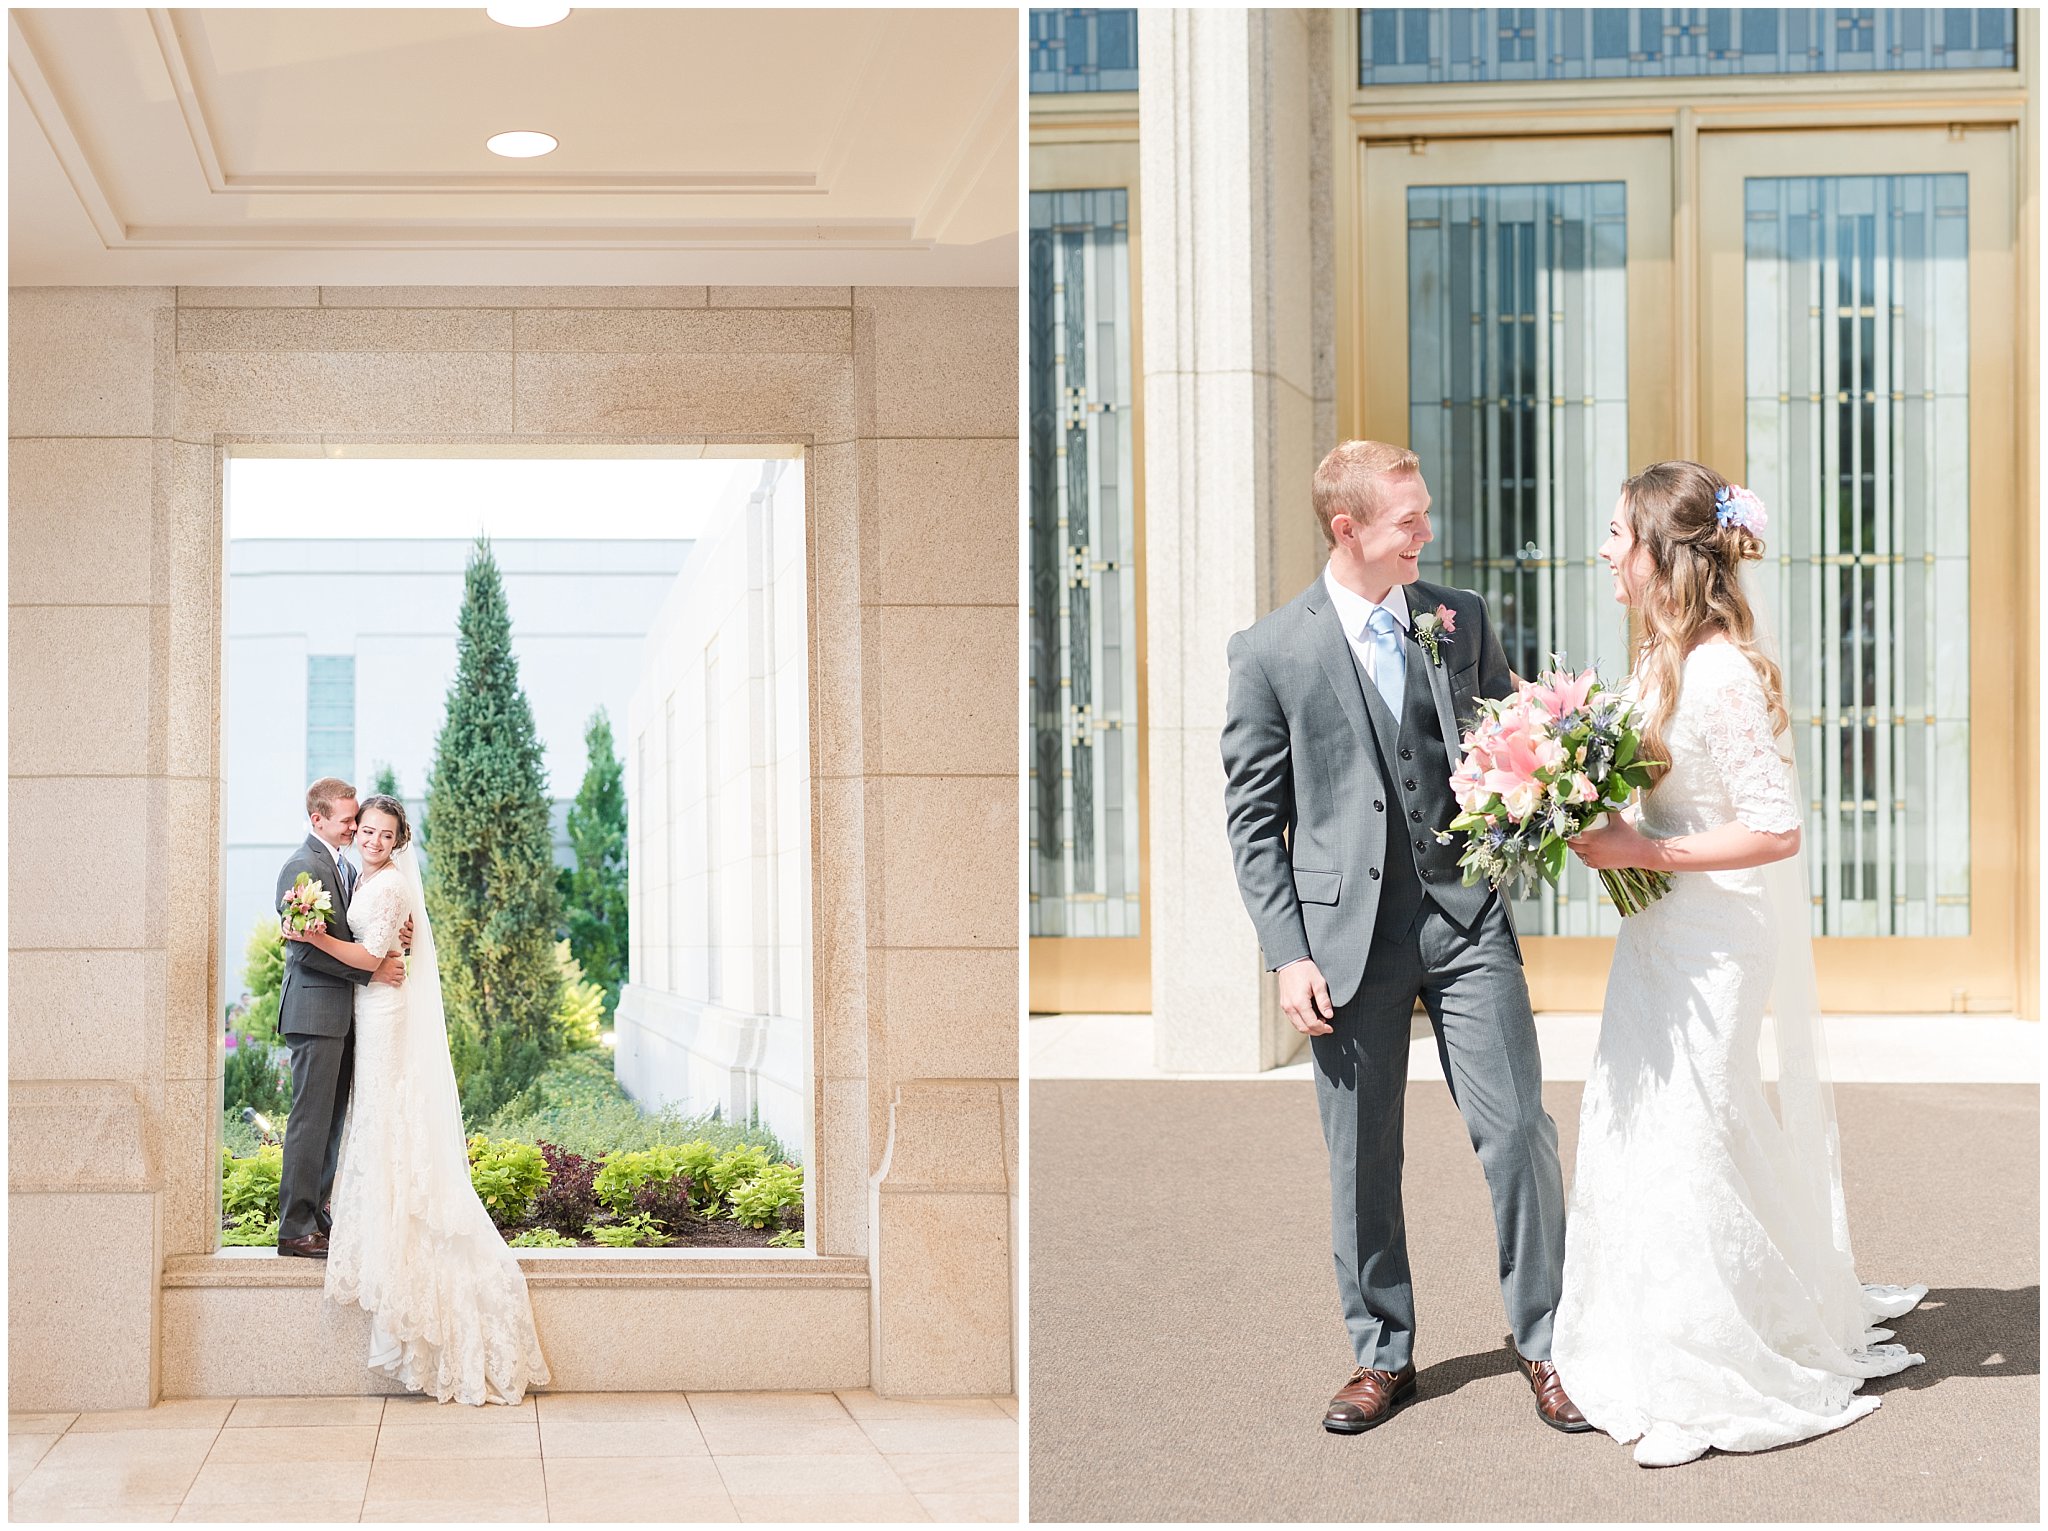 Bride with lace wedding dress and veil and groom wearing grey suit with light blue tie temple exit | Ogden Temple Summer Wedding | Jessie and Dallin Photography